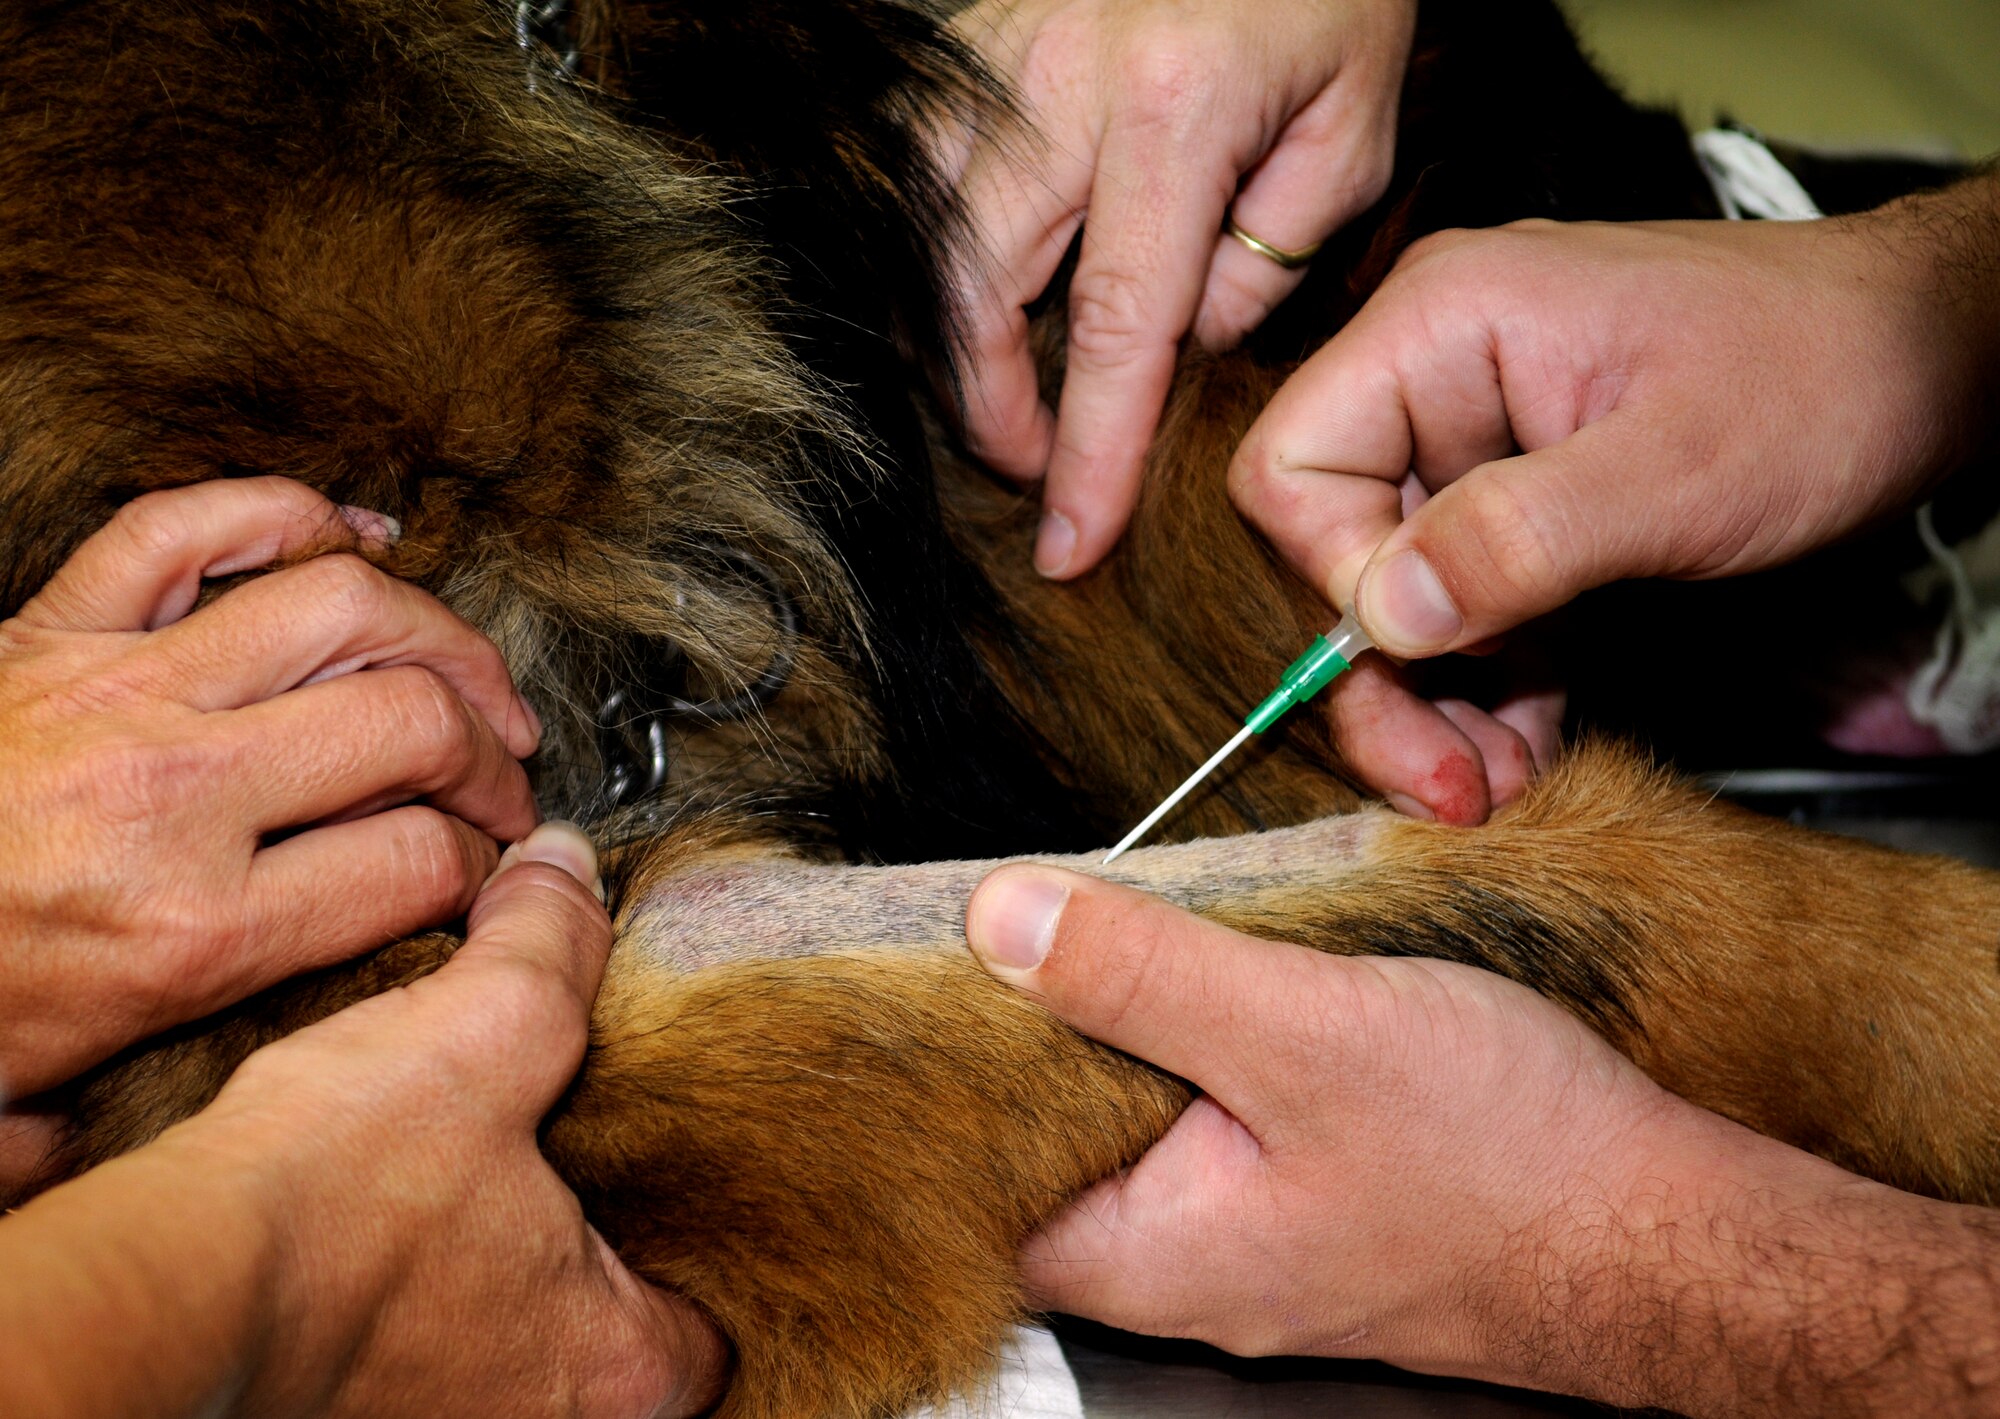 Suli, a 39th Security Forces Squadron military working dog, receives an IV in preparation for his prophylactic gastropexy, also referred to as stomach tacking, to prevent gastric torsion, or twisting of the stomach Thursday, Aug. 27, 2009 at the Veterinary Clinic, Incirlik Air Base, Turkey.  The surgery was completed after a recommendation by the Army, the service in charge of medical care for the military working dog program, for all dogs in the program to receive the surgery.  Stomach twisting is caused by gastric dilatation and volvulus, commonly known as bloat, the second leading killer of dogs after cancer.  (U.S. Air Force photo/Staff Sgt. Raymond Hoy)